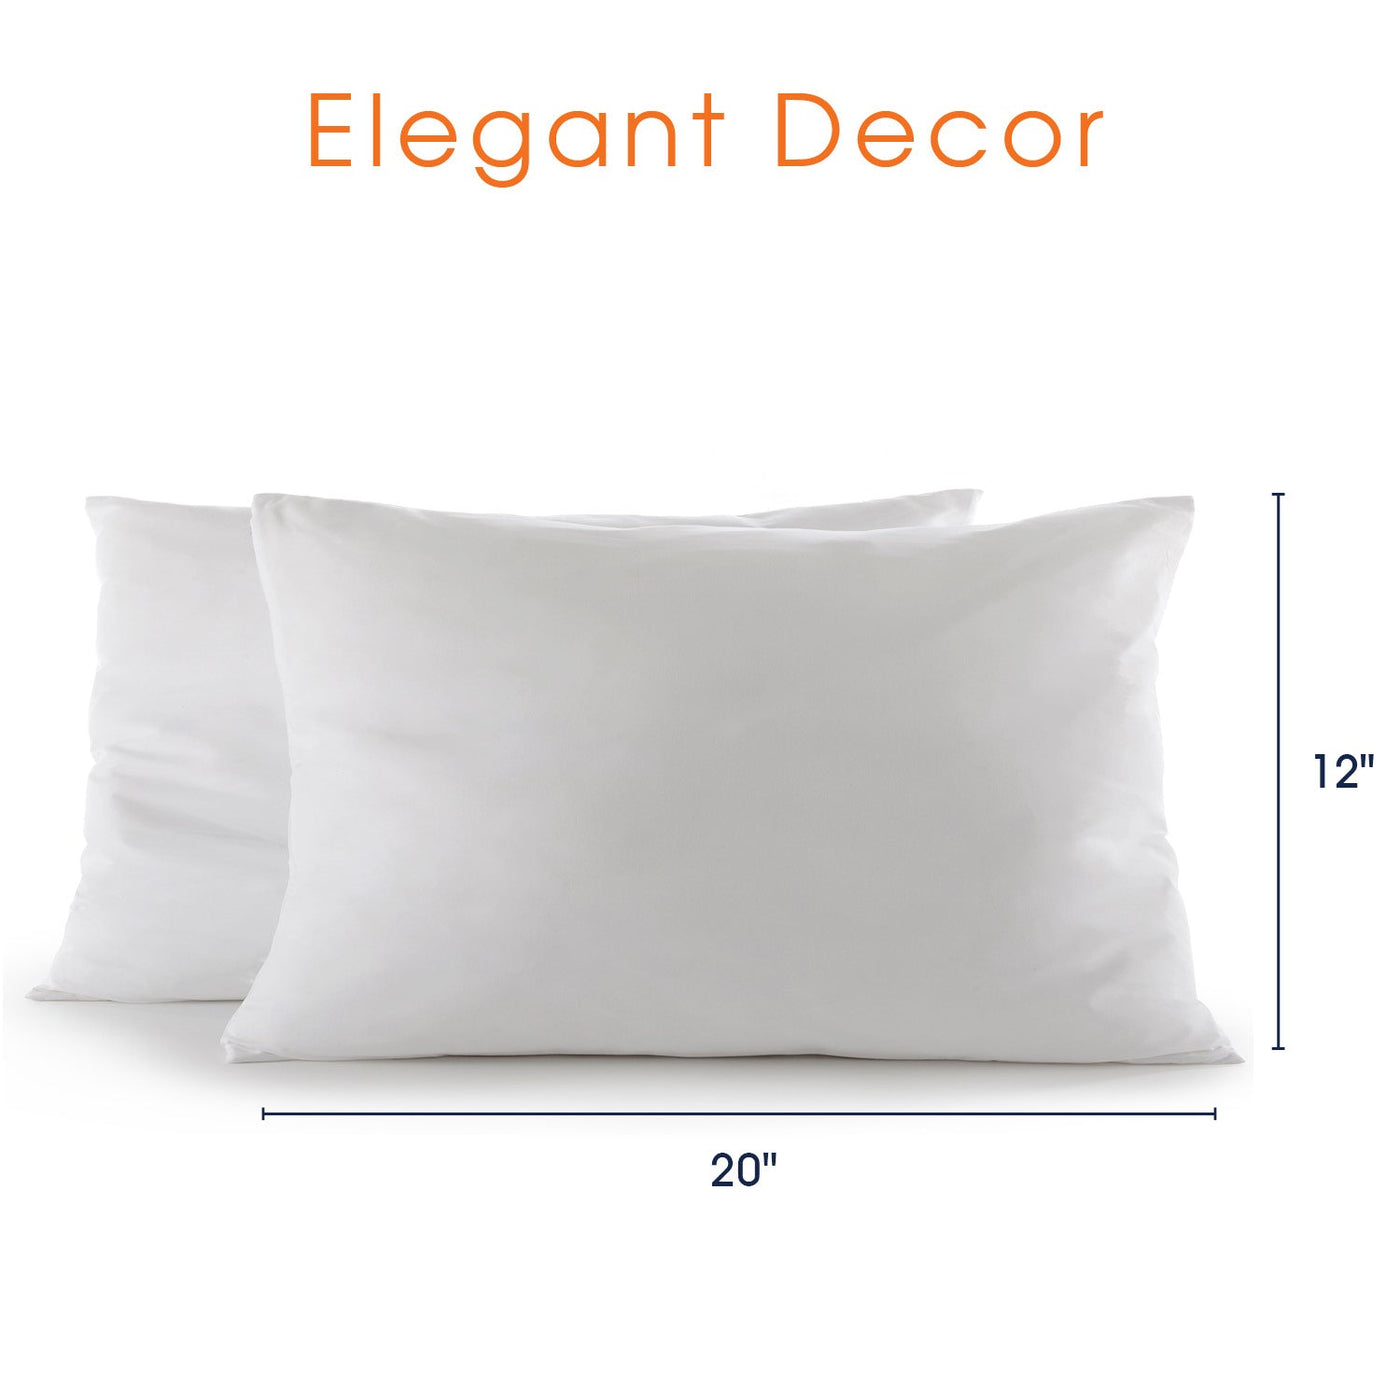 Cheer Collection Set of 2 Decorative White Square Accent Throw Pillows and Insert for Couch Sofa Bed, Includes Zippered Cover - 16x16